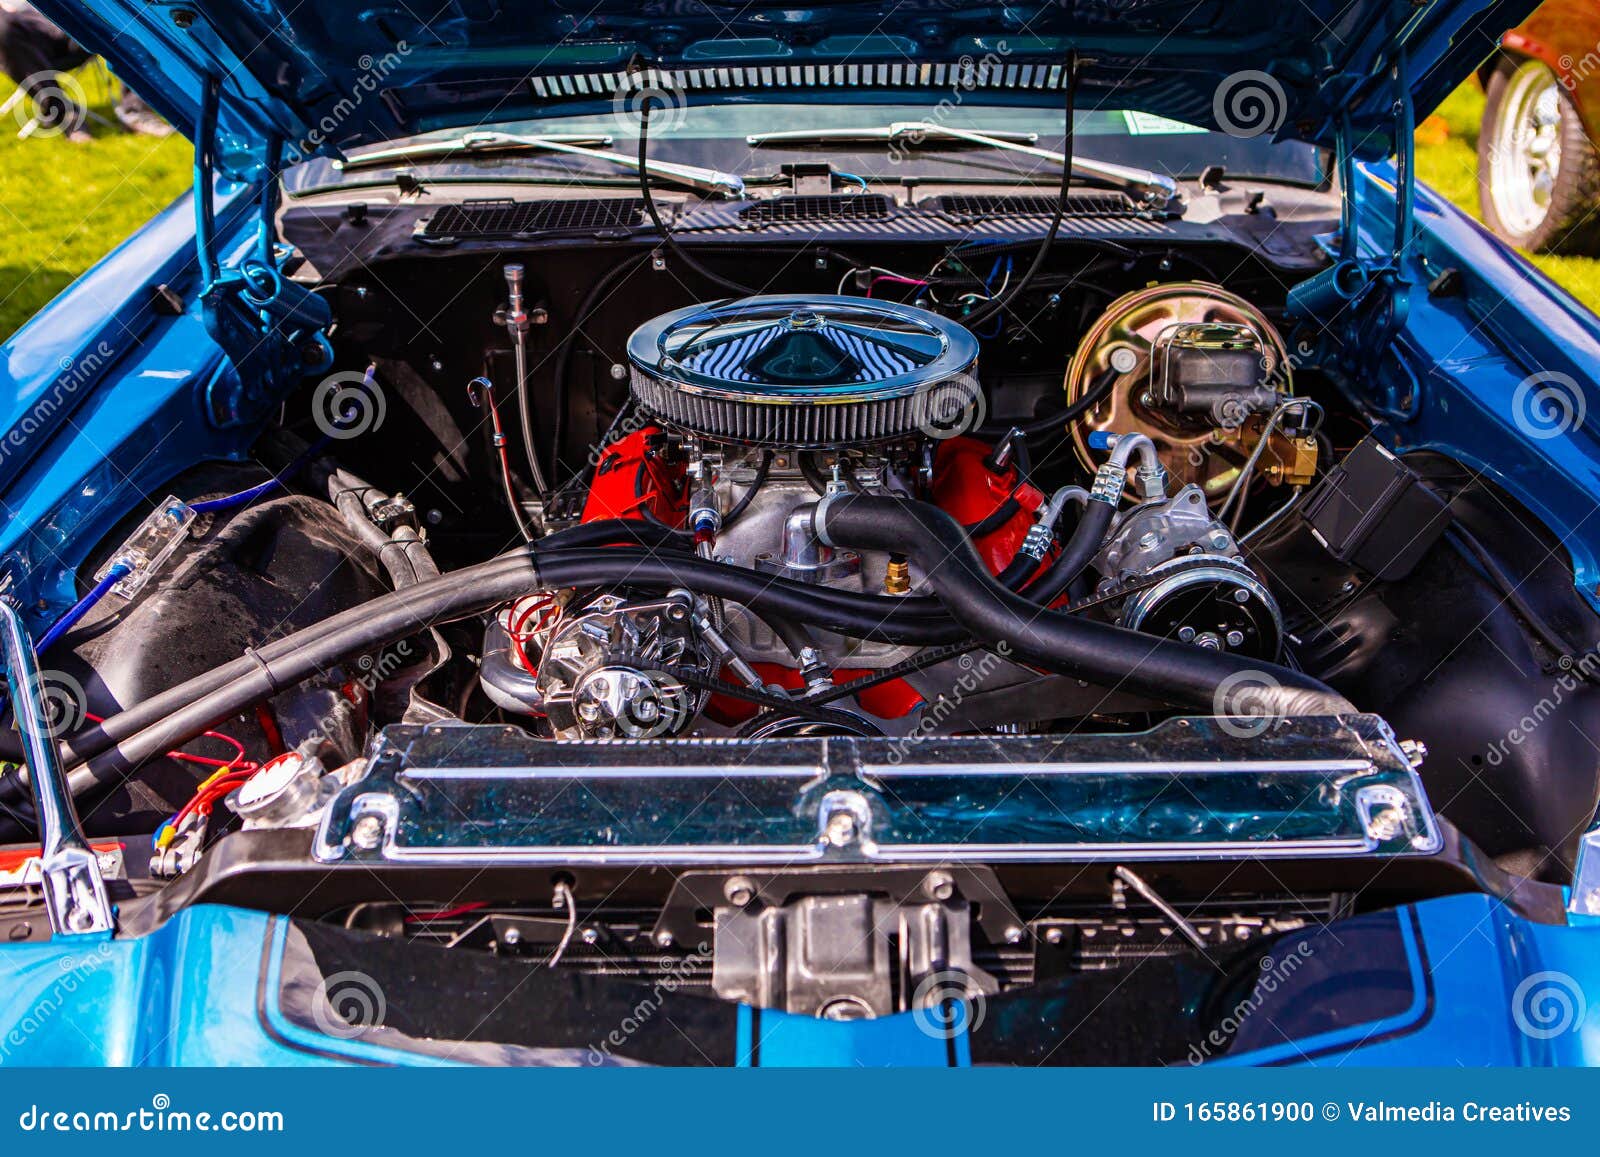 Classic American Muscle Car Under Hood Stock Photo - Image of round